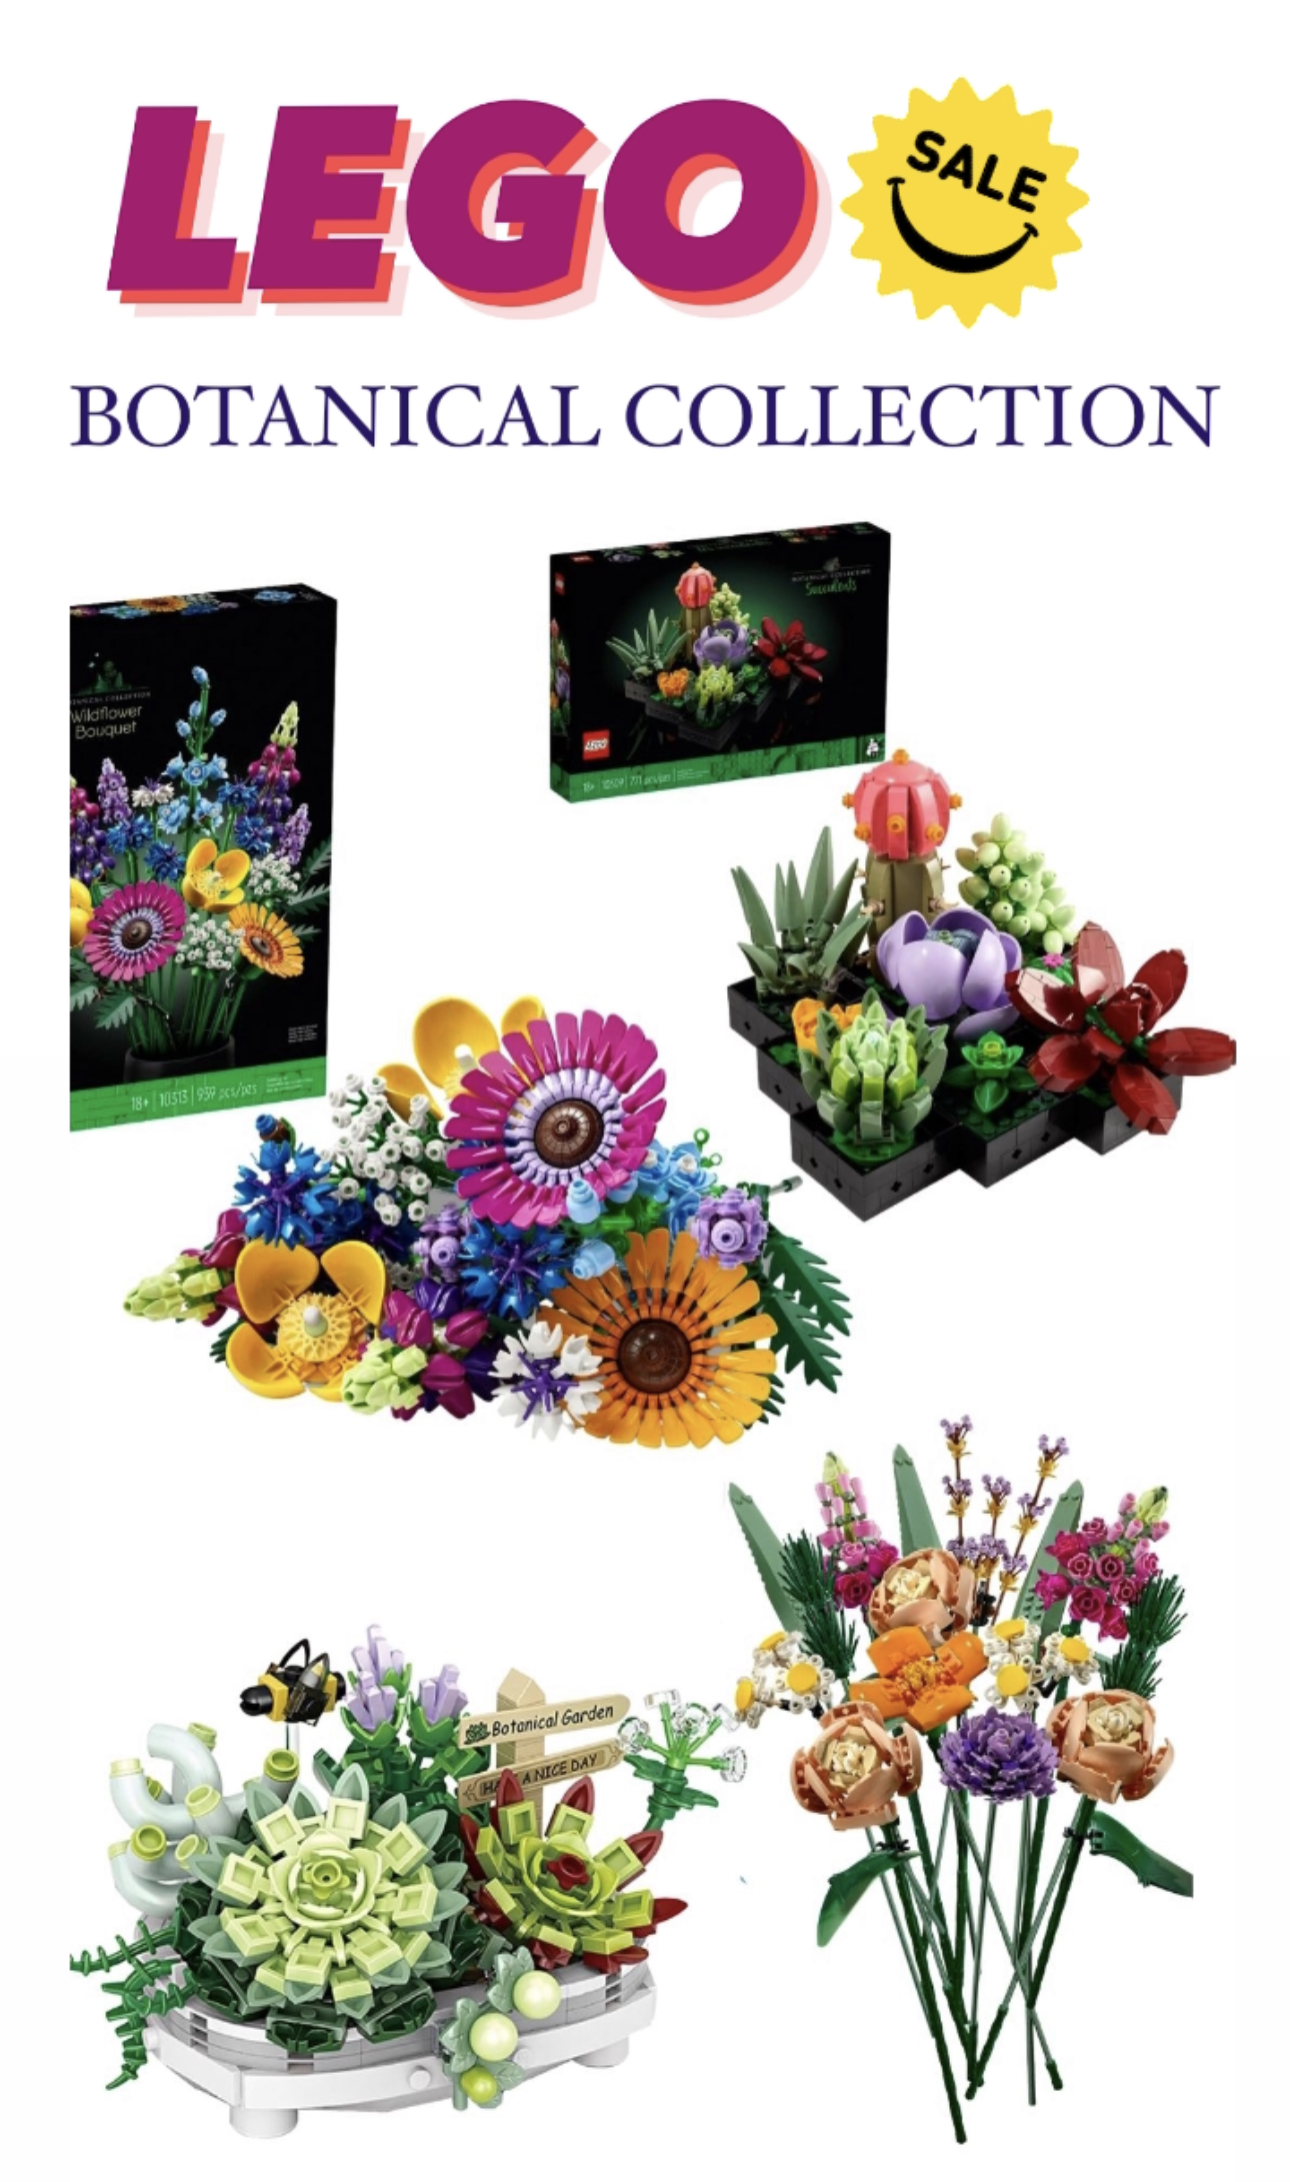 Holiday Toy Deals at Walmart Lego botanical collection sales